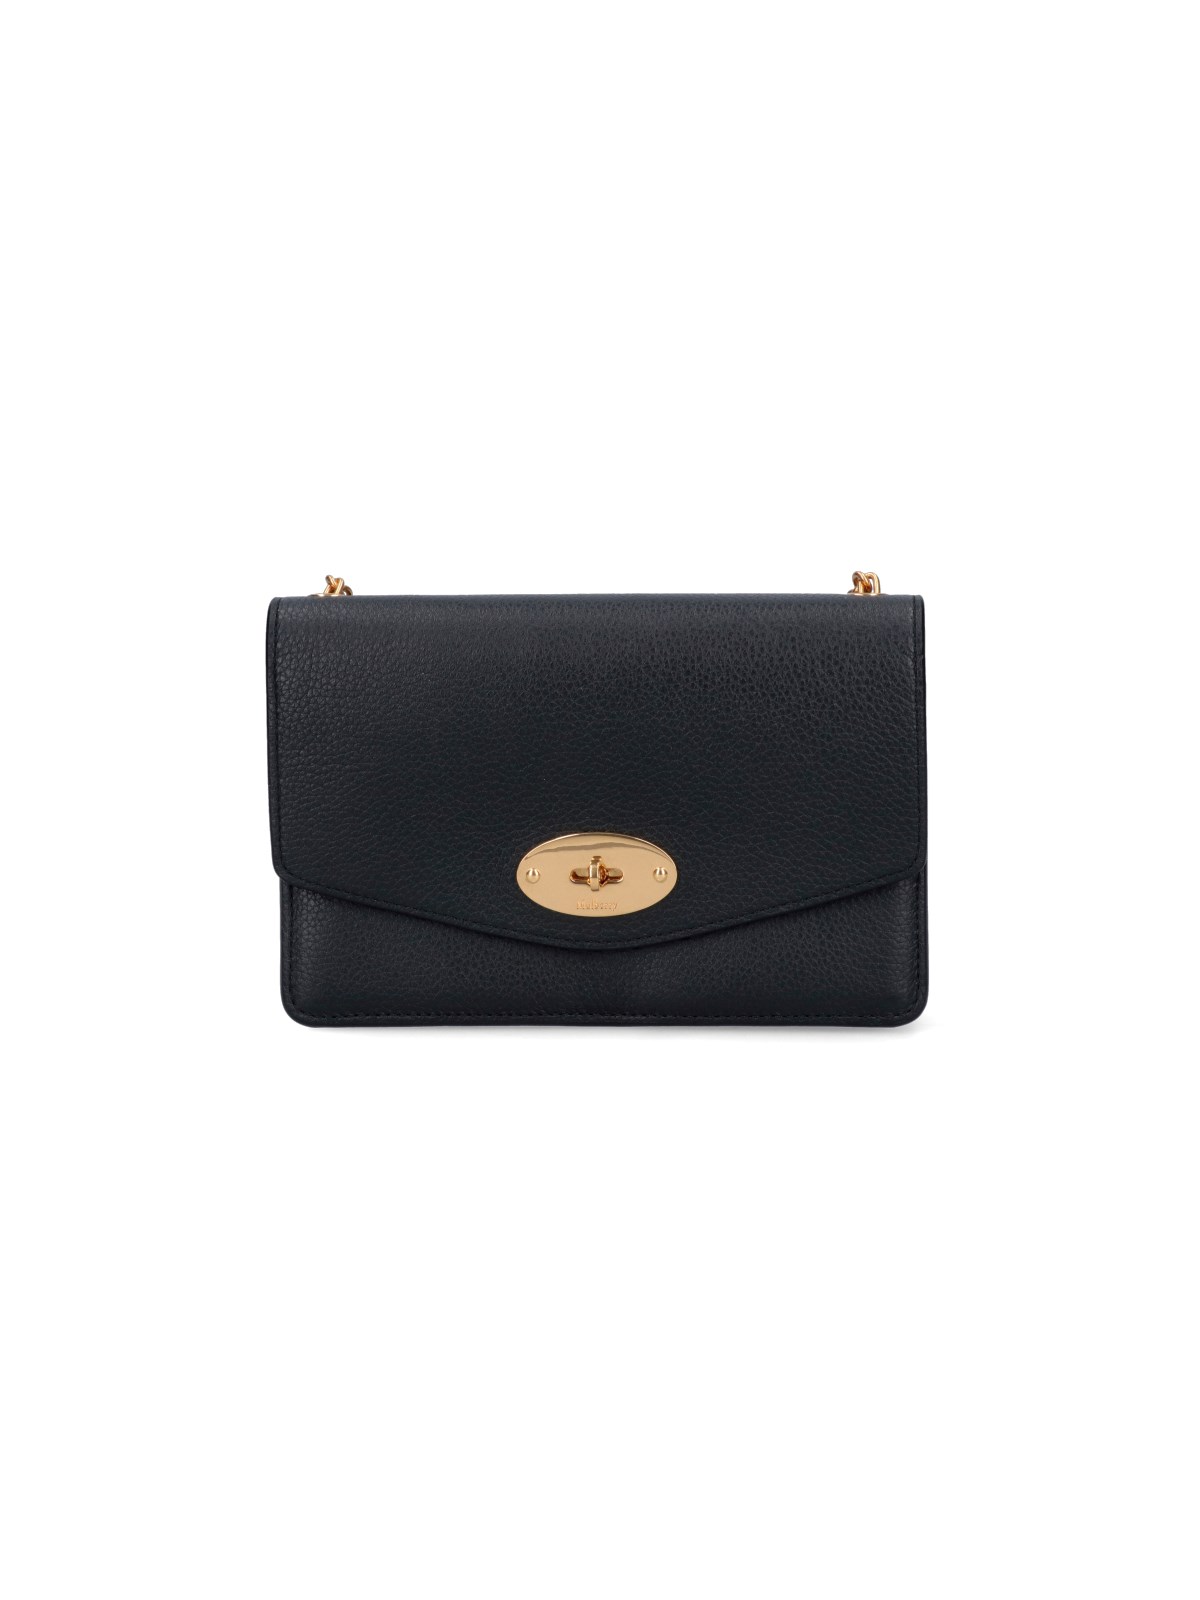 Mulberry 'darley' Small Shoulder Bag In Nero